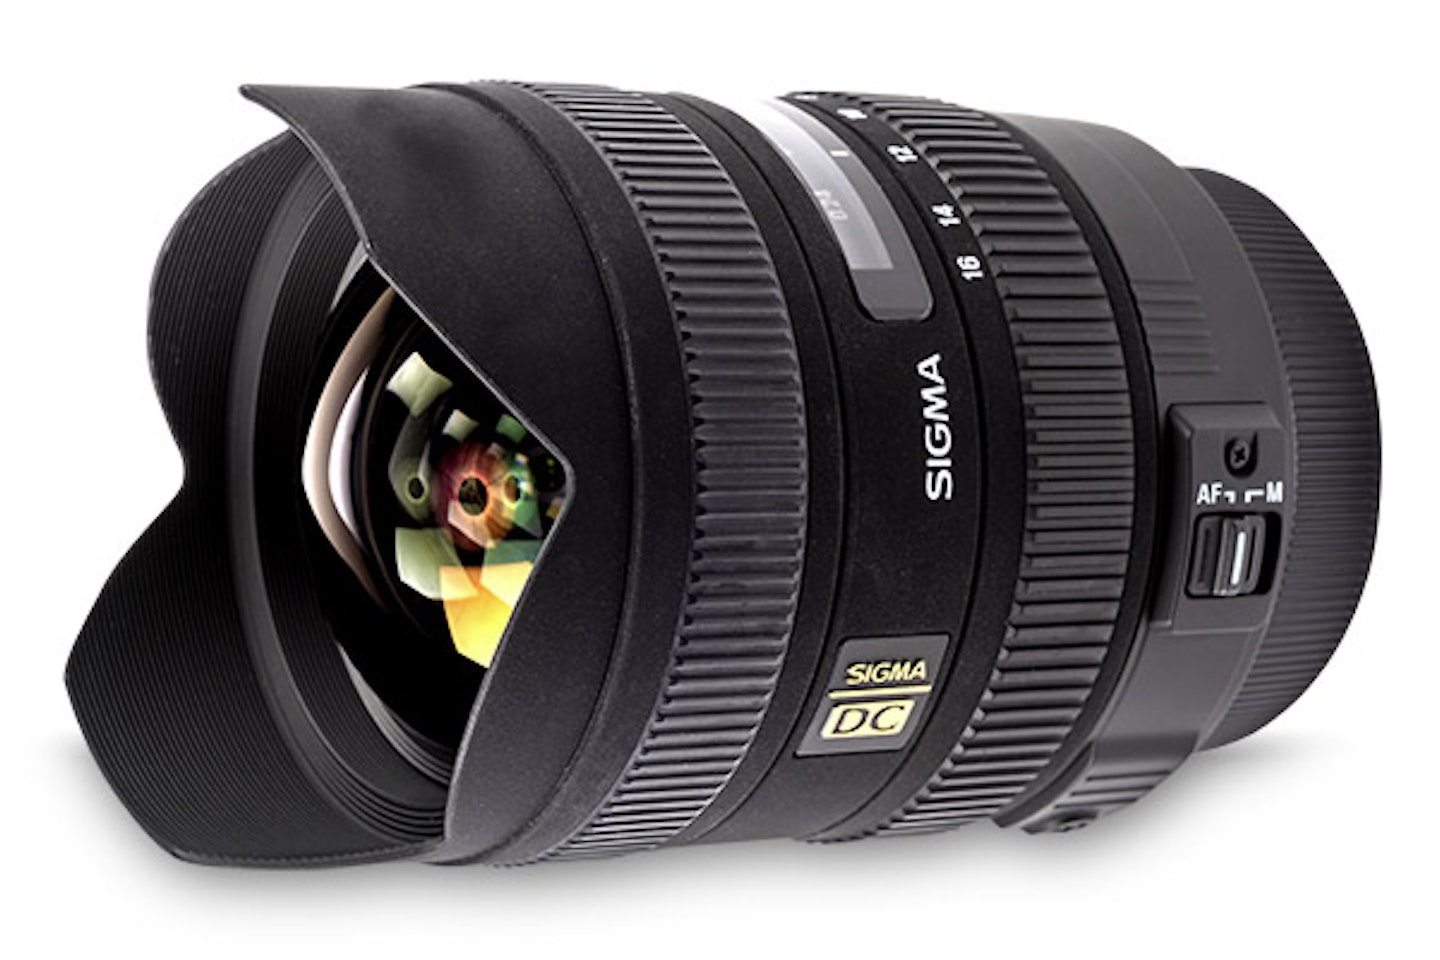 Sigma 8-16mm F/4.5-5.6 DC HSM Review